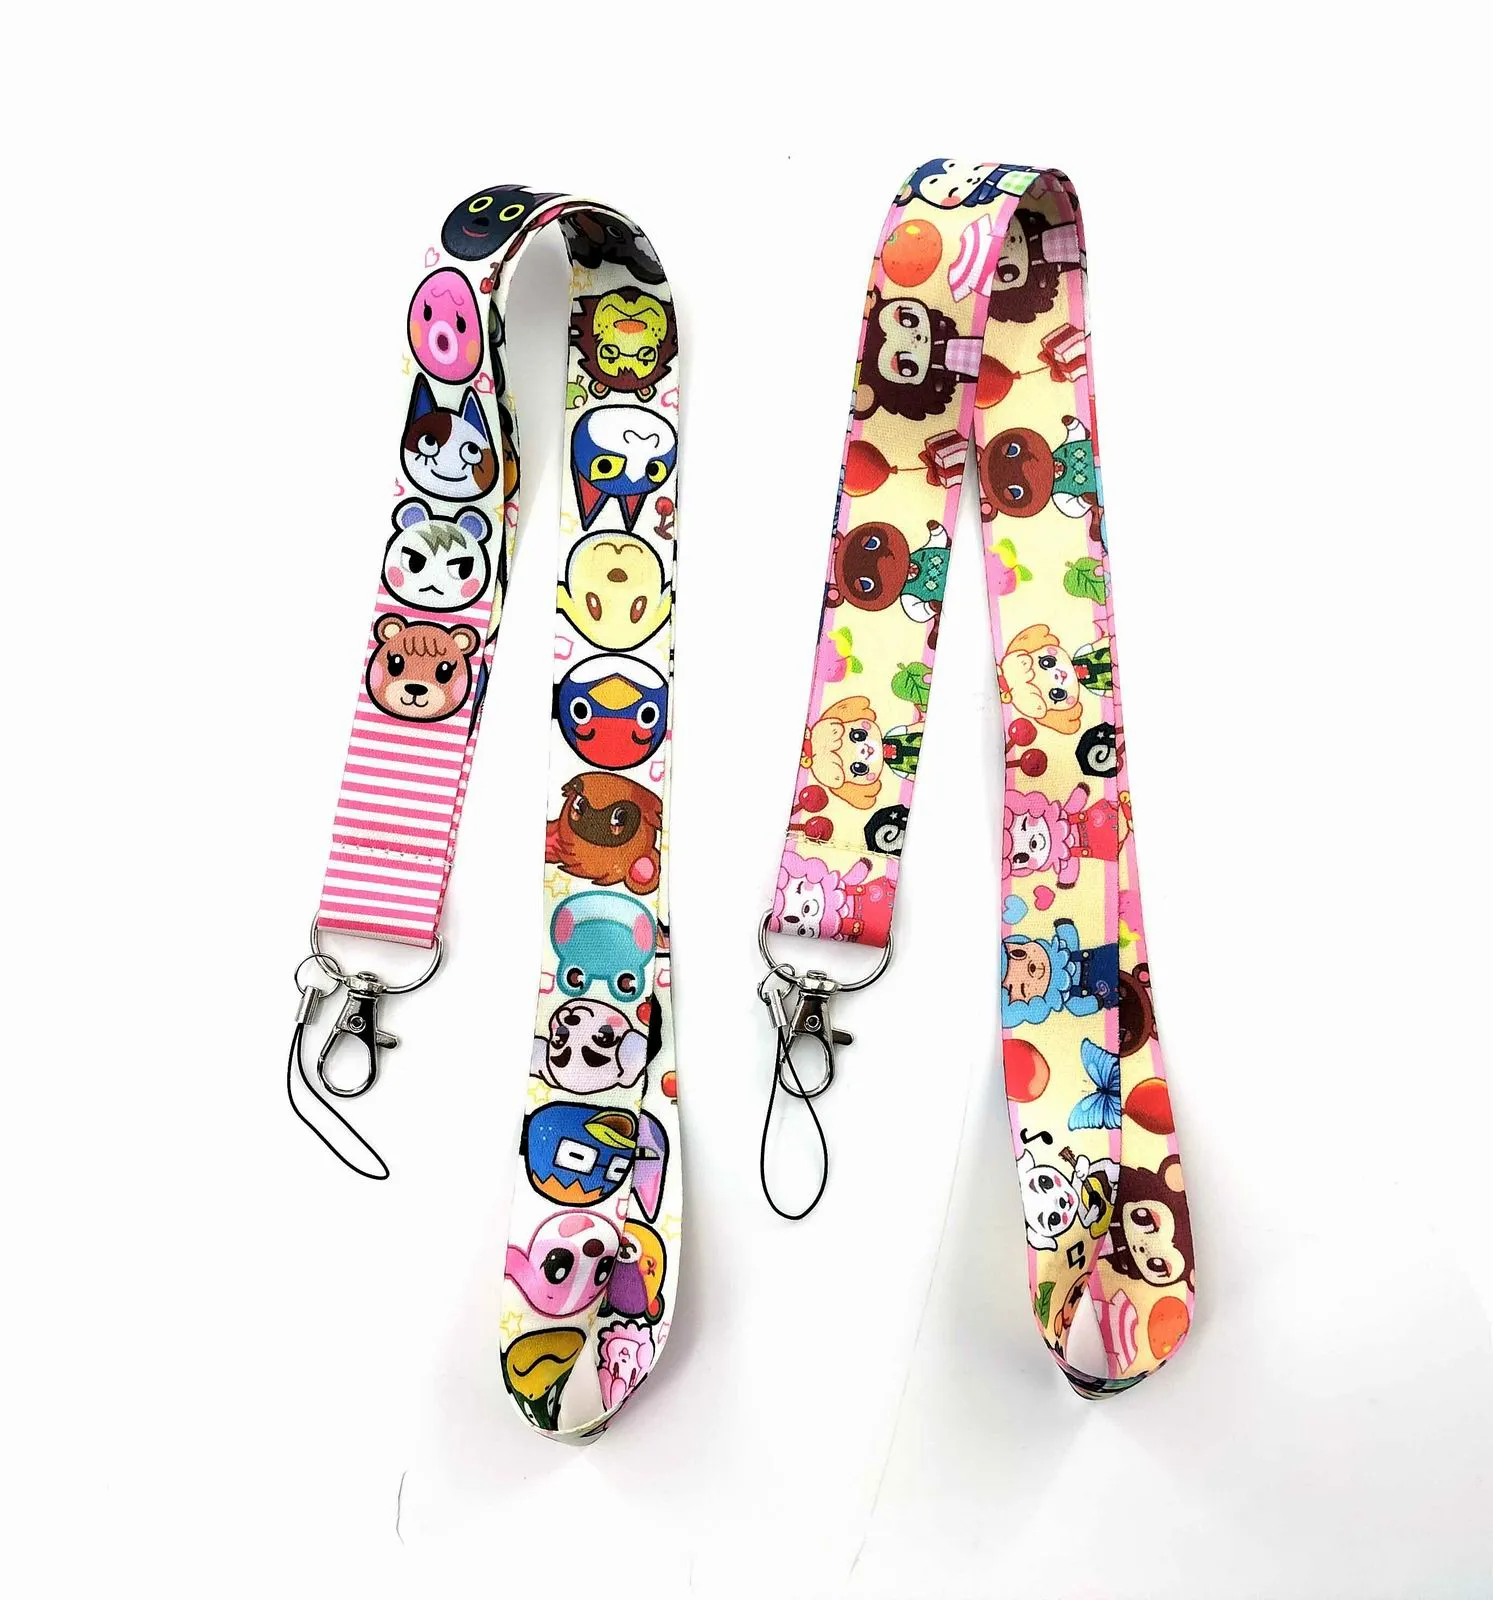 Cell Phone Straps & Charms 20pcs Cartoon lanyard Key Chain ID card hang rope Sling Neck strap Pendant boy girl Gifts #21